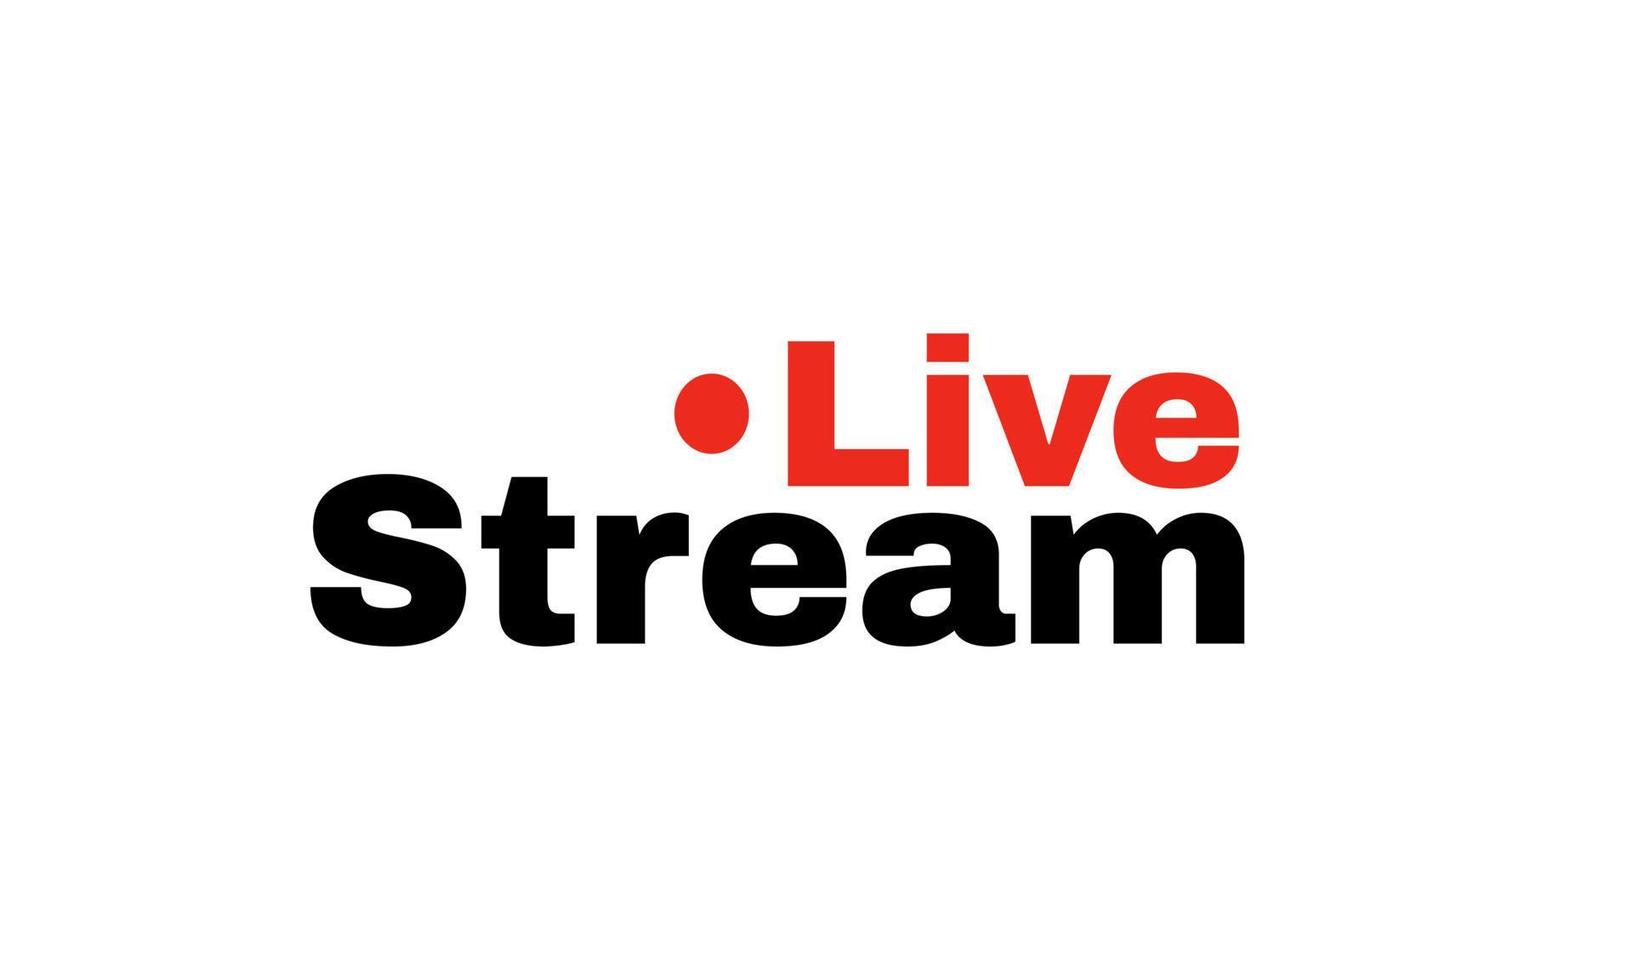 unique media live streaming design icon isolated on vector